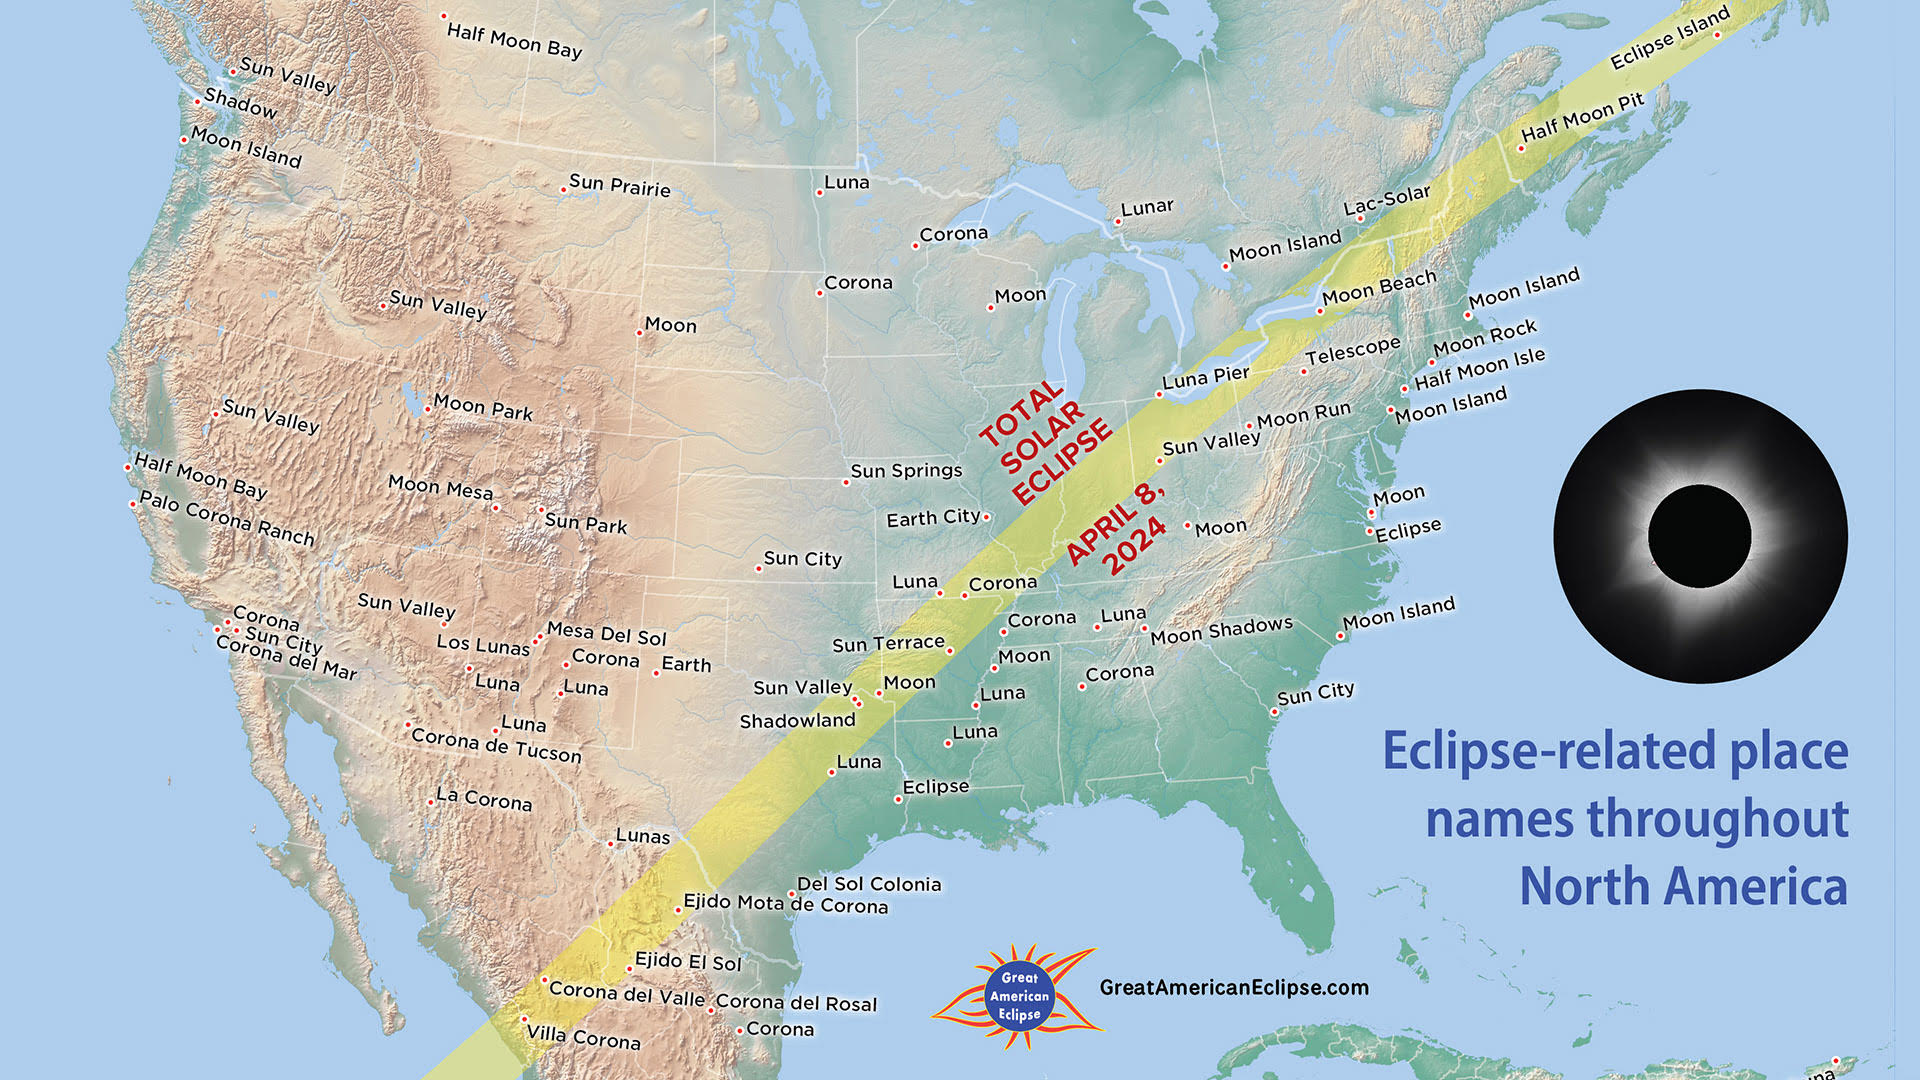 a map showing the path of totality and labelled places along the path that experience totality.